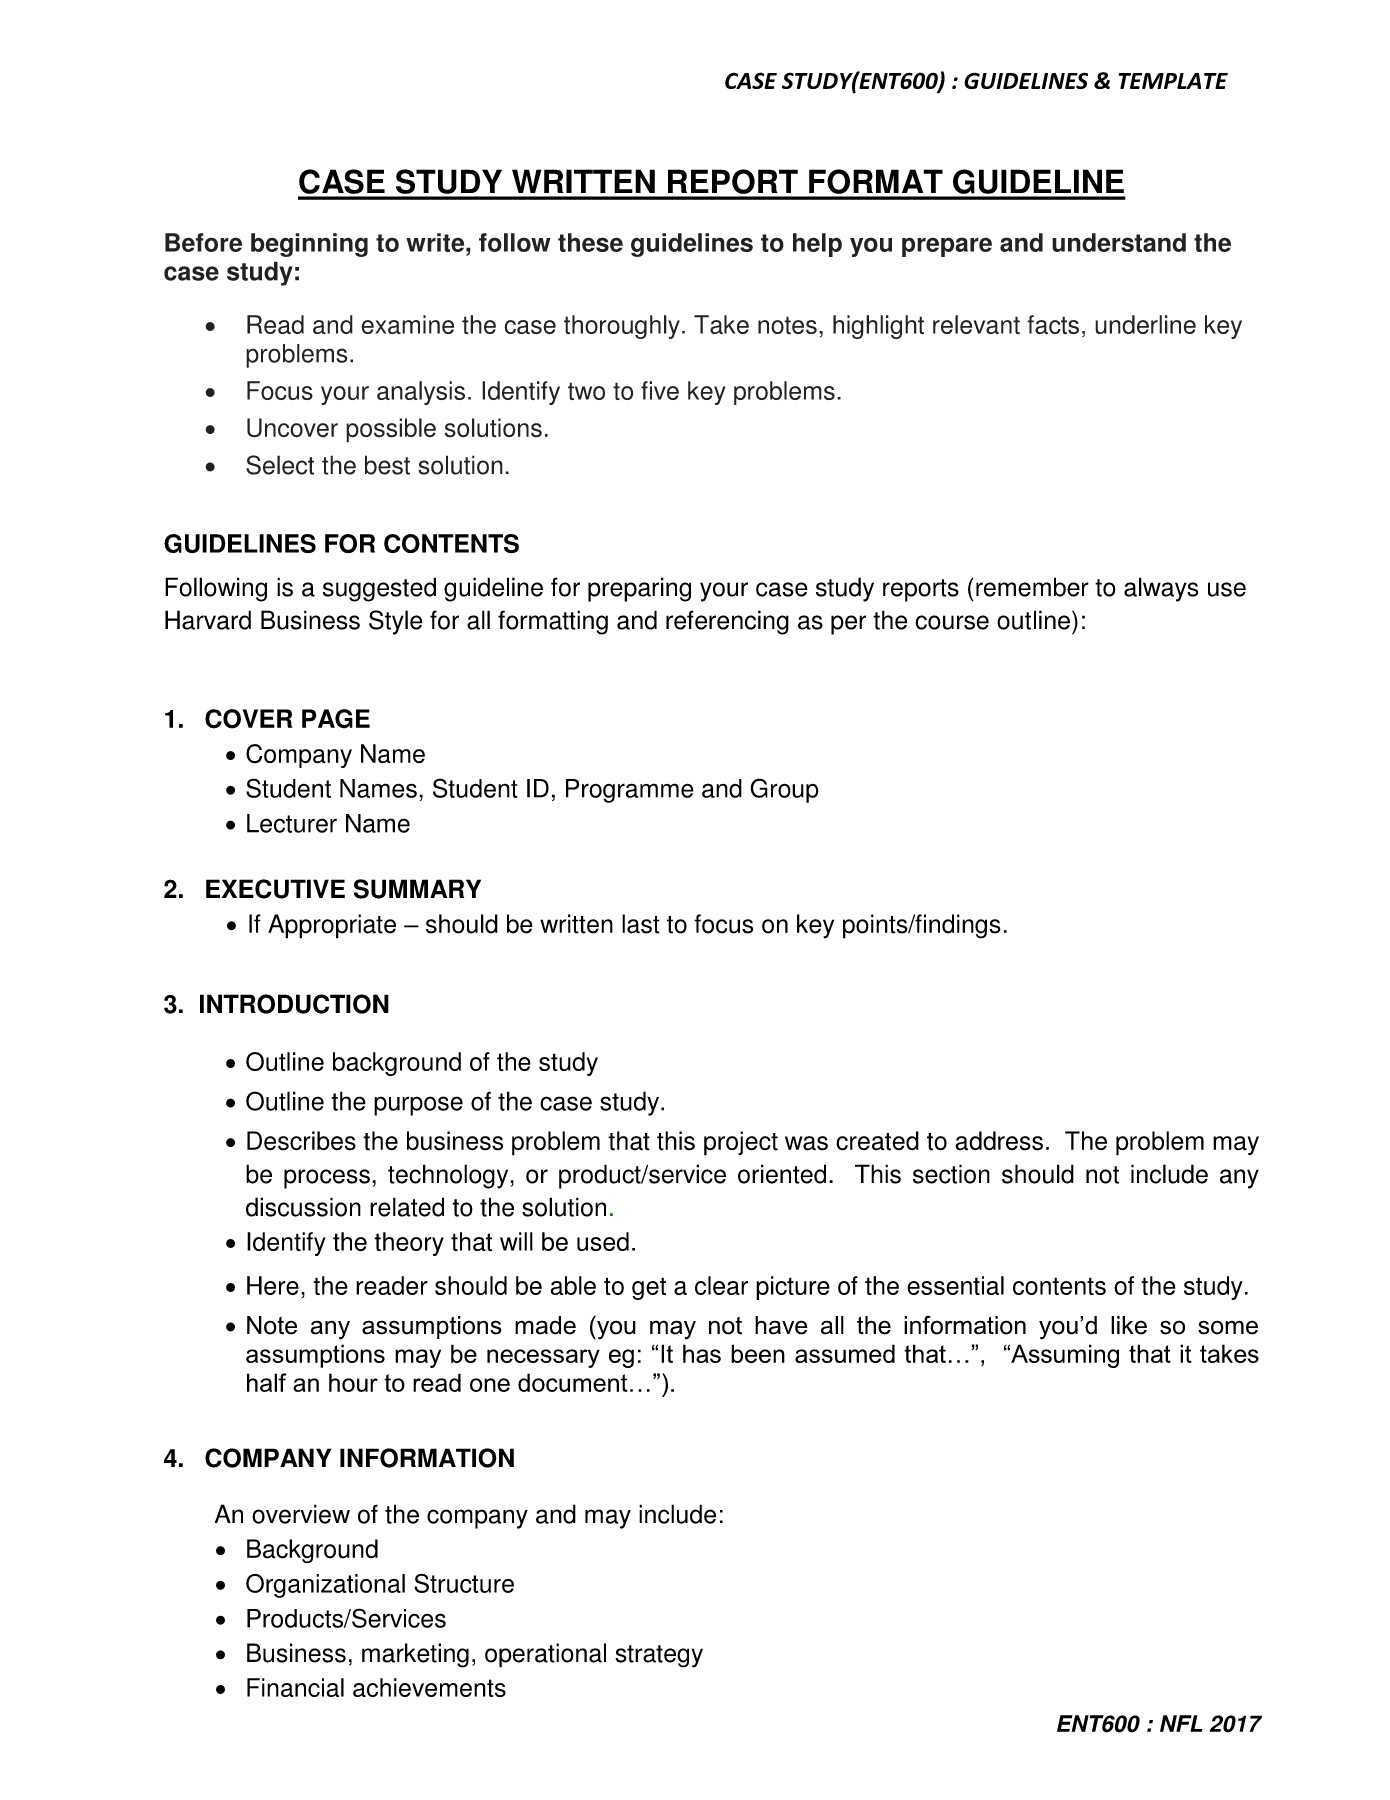 Ent600 Case Study Guidelines & Template Pages 1 – 5 – Text With Report Content Page Template